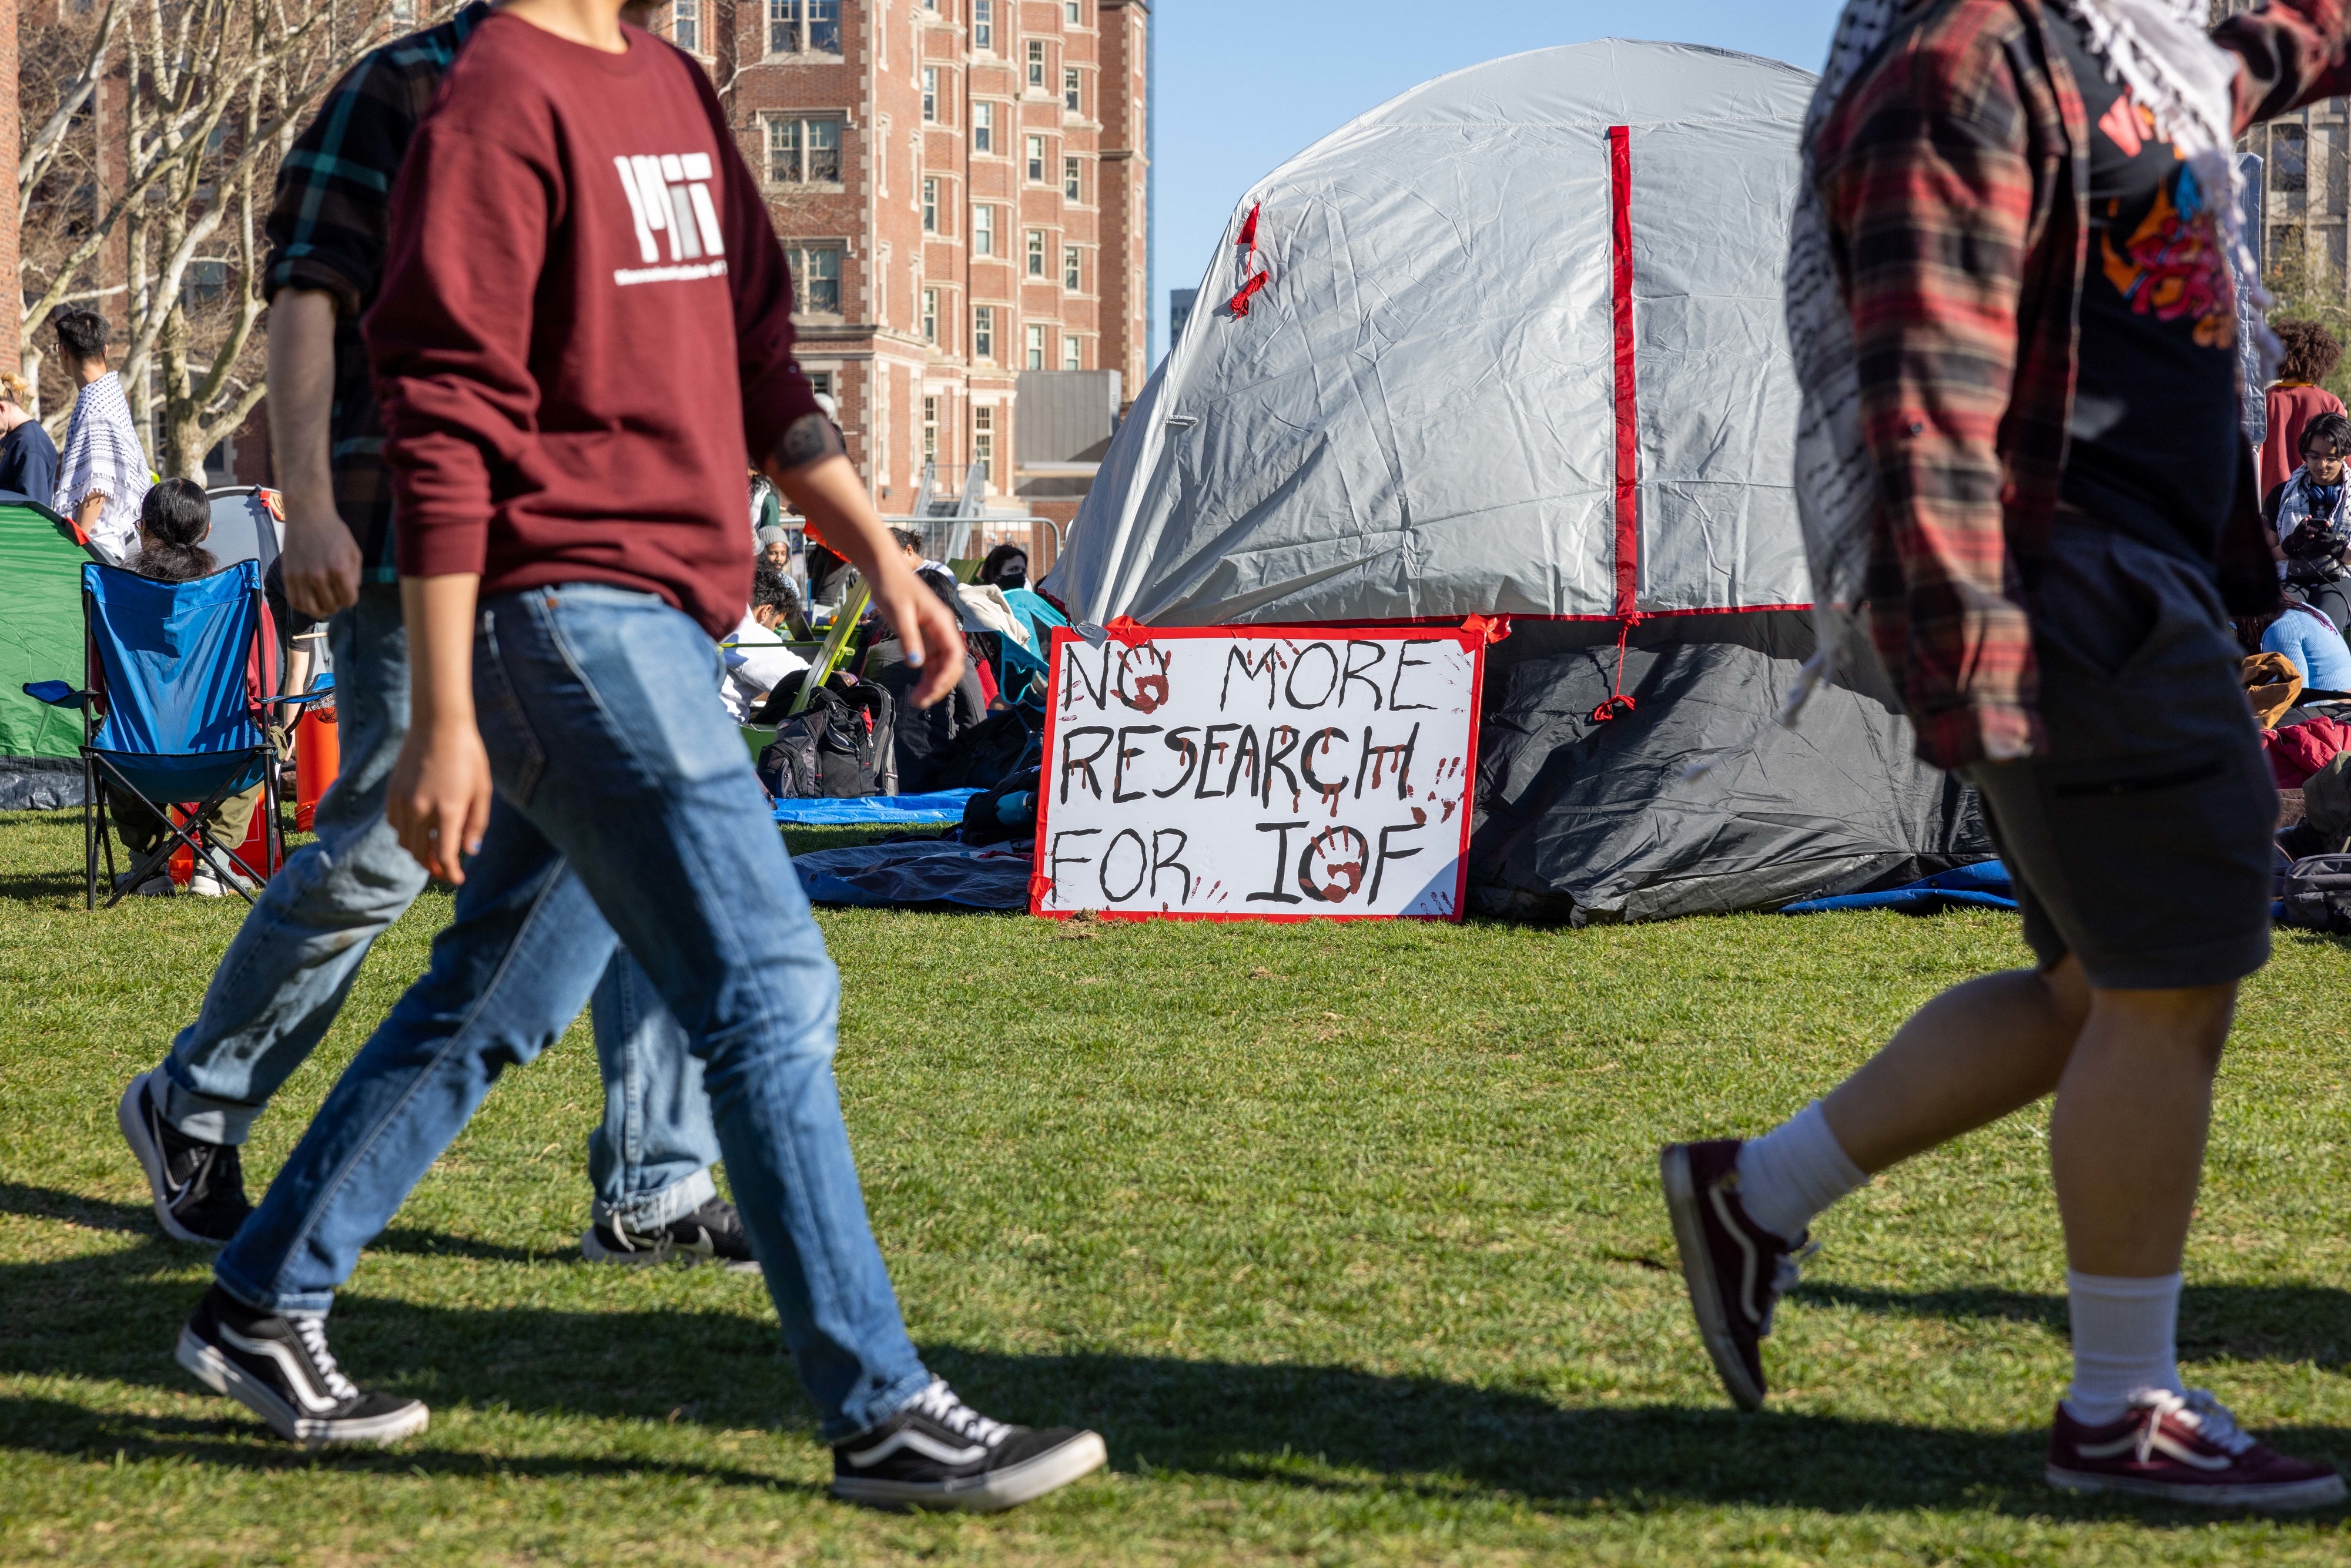 Protest sign reading &quot;No More Research for IGF&quot; in front of a tent with people passing by